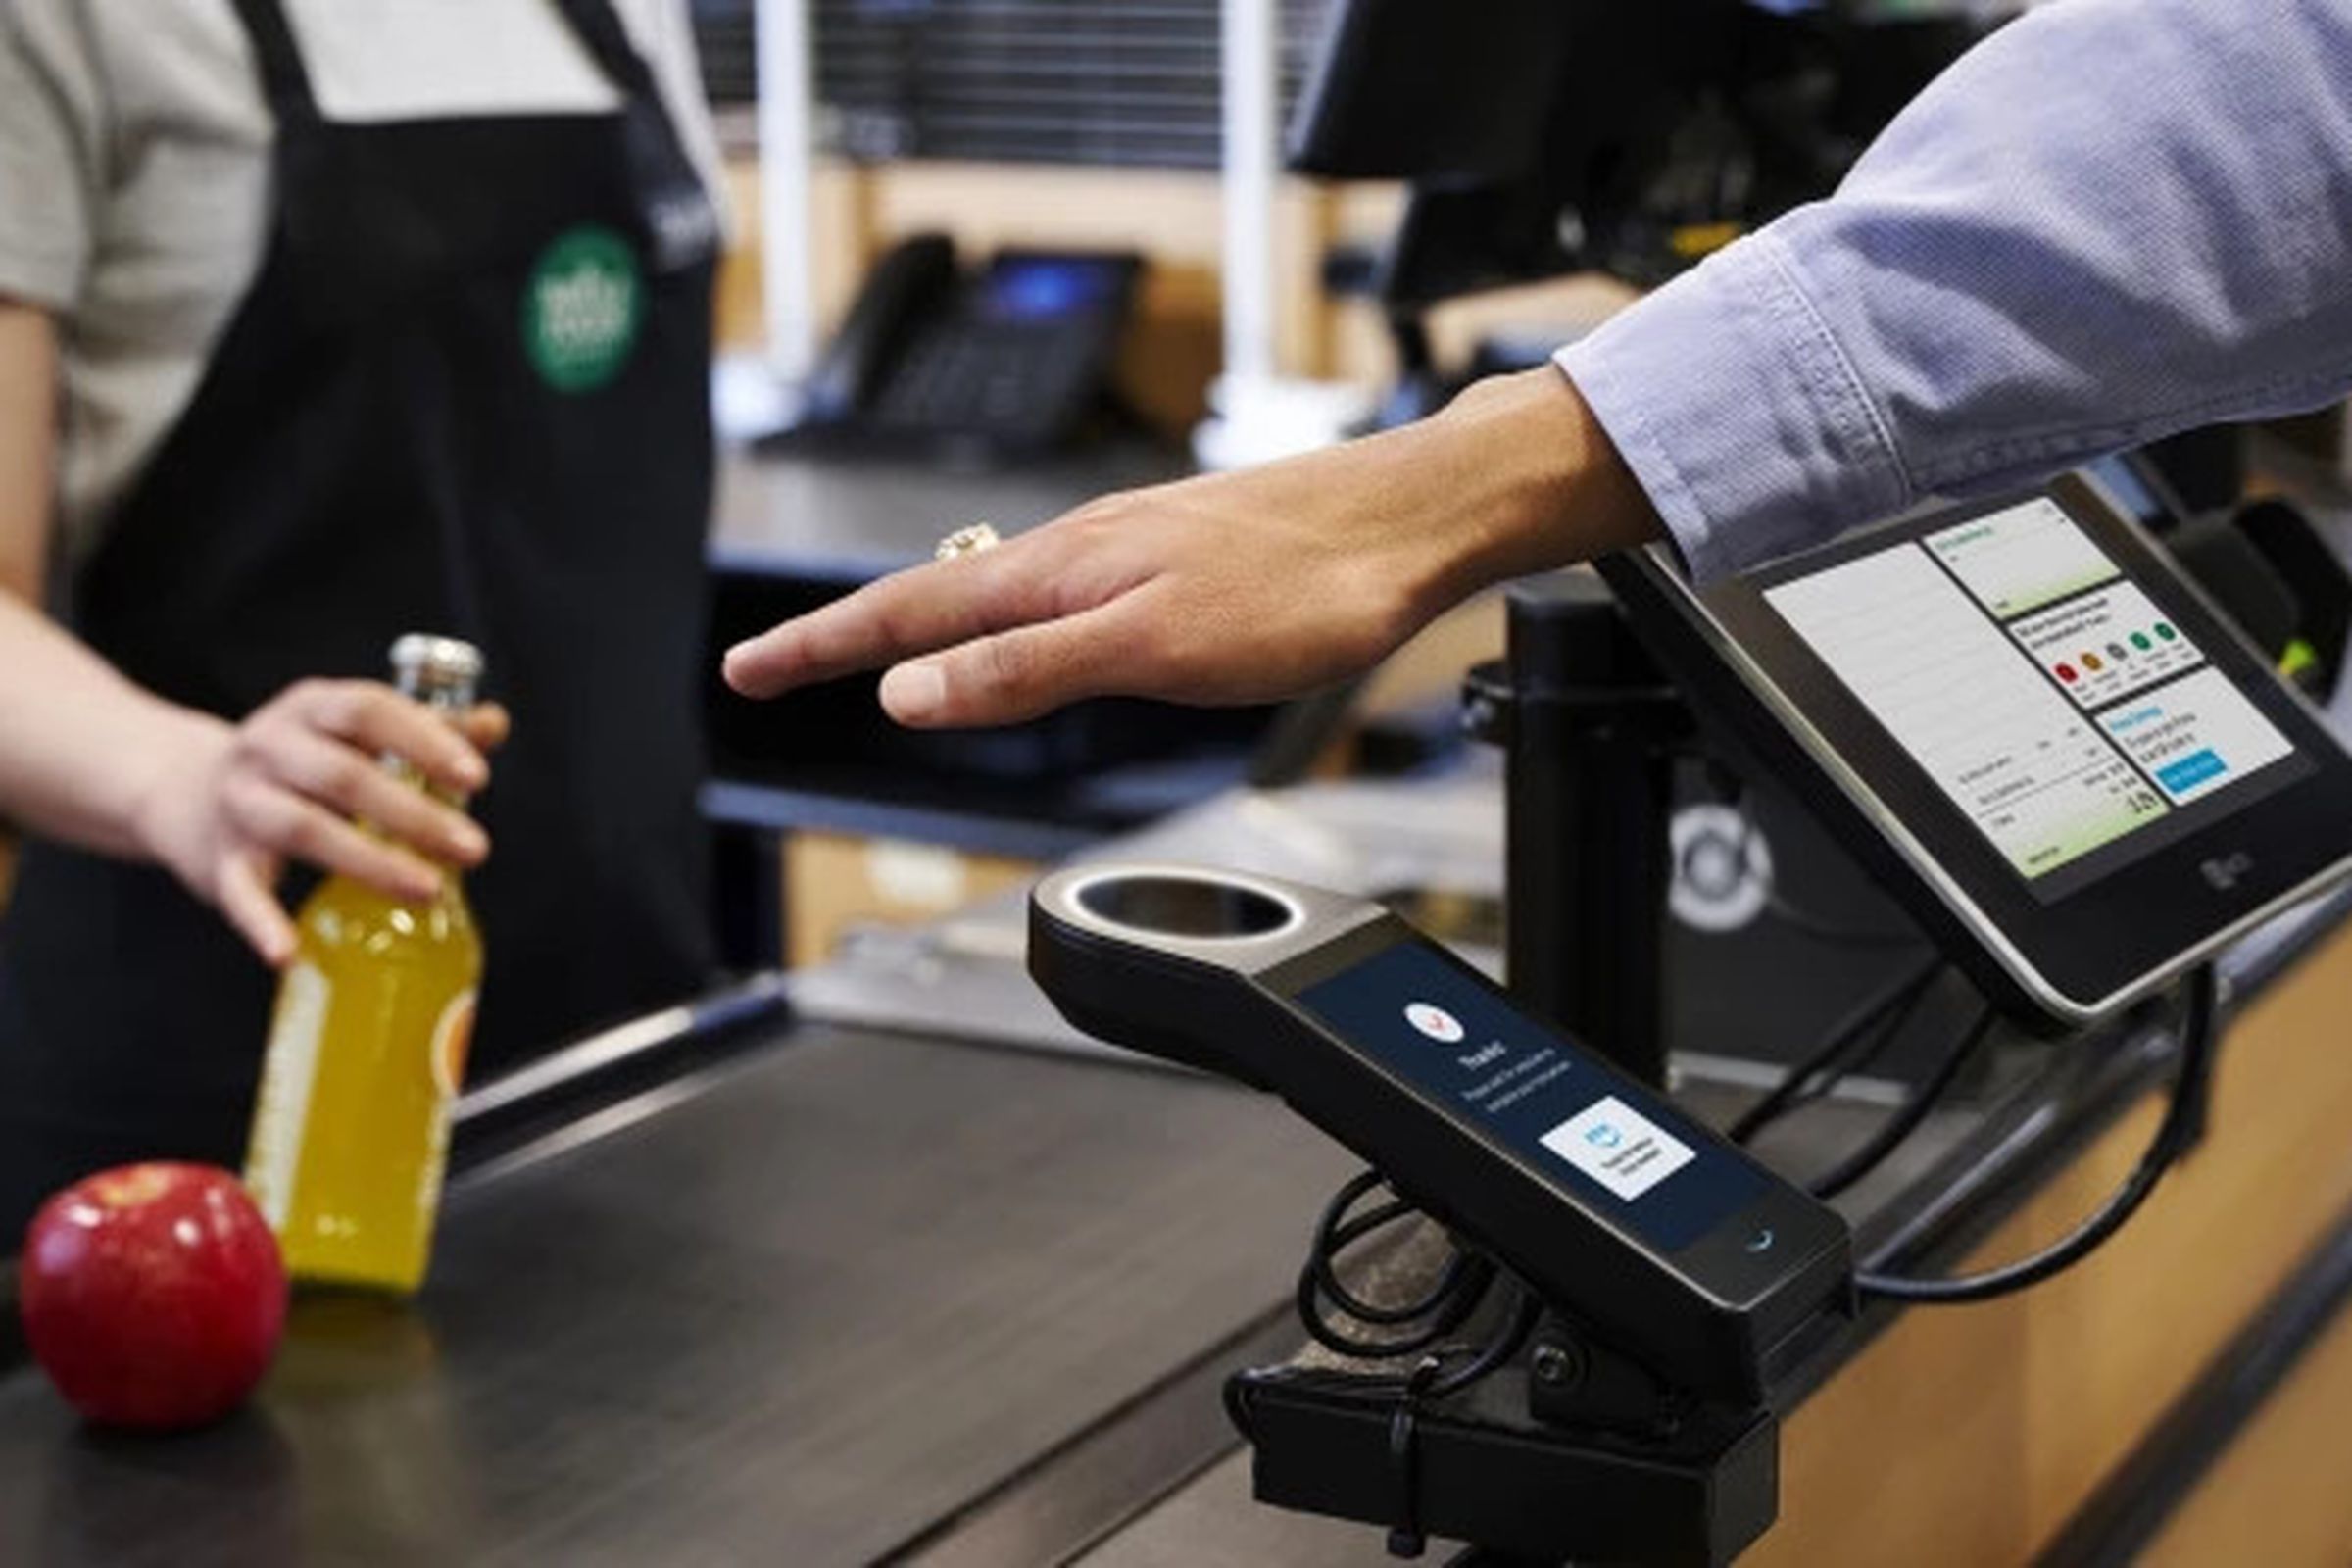 An image showing someone hovering their palm over Amazon’s scanner